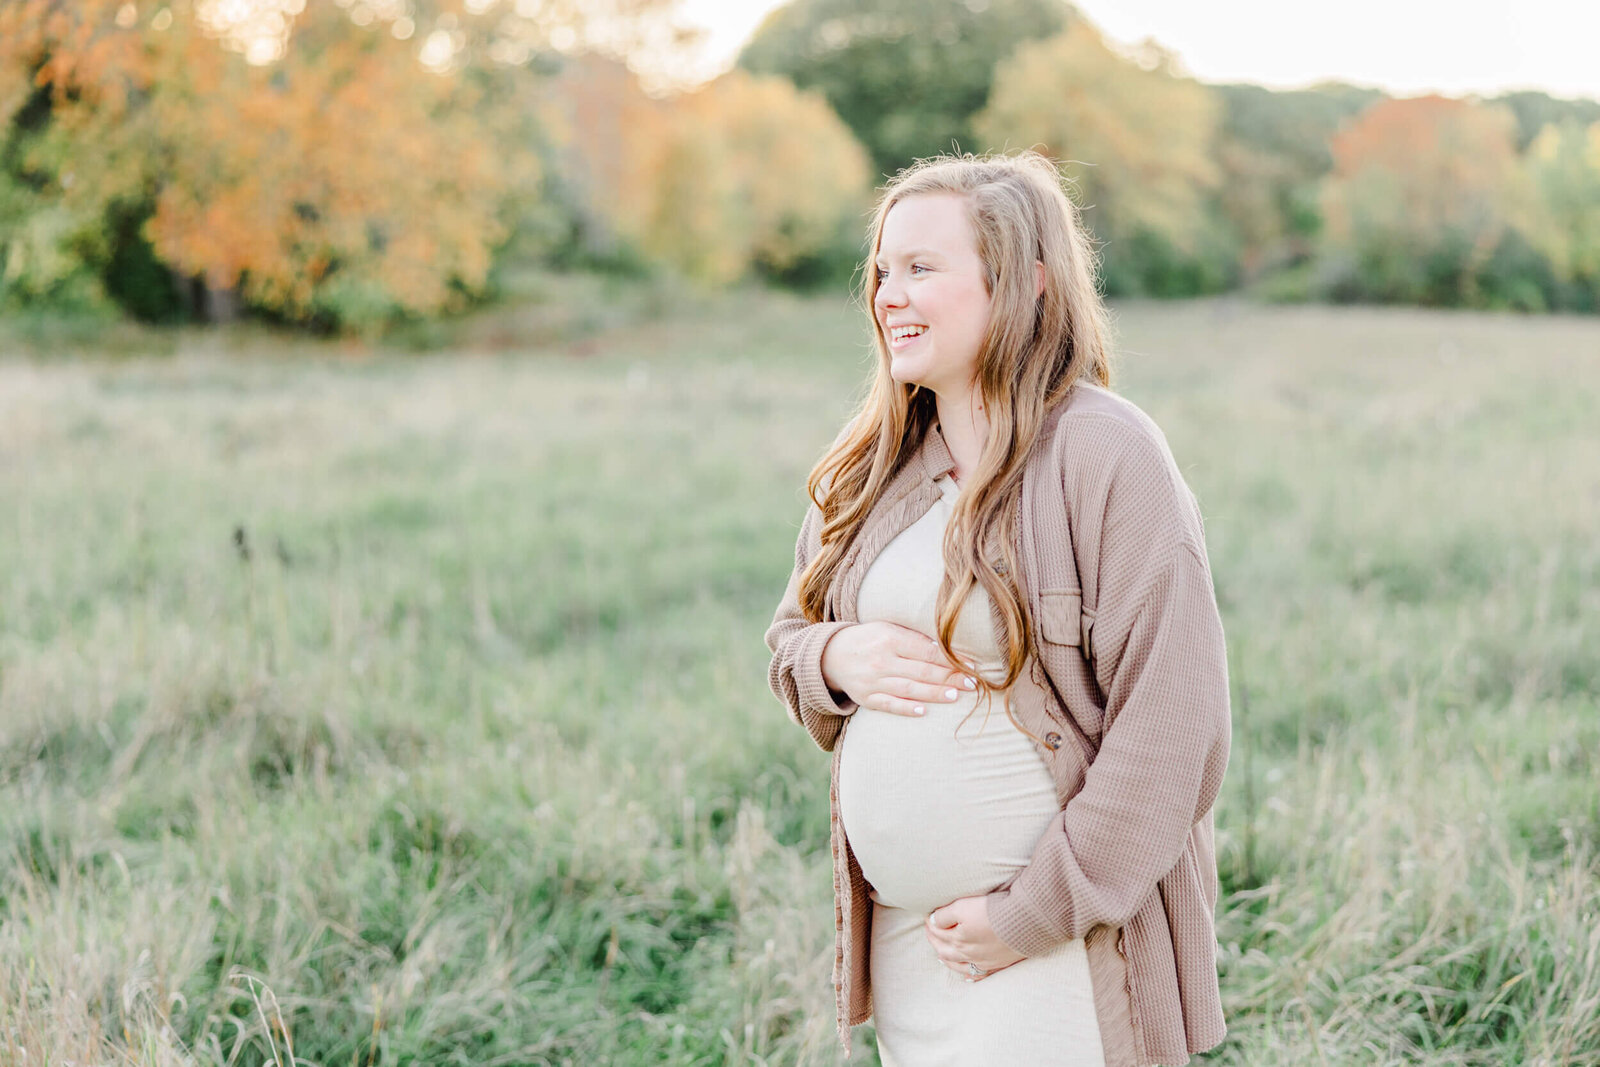 Pregnant woman in a meadow looks up and smiles